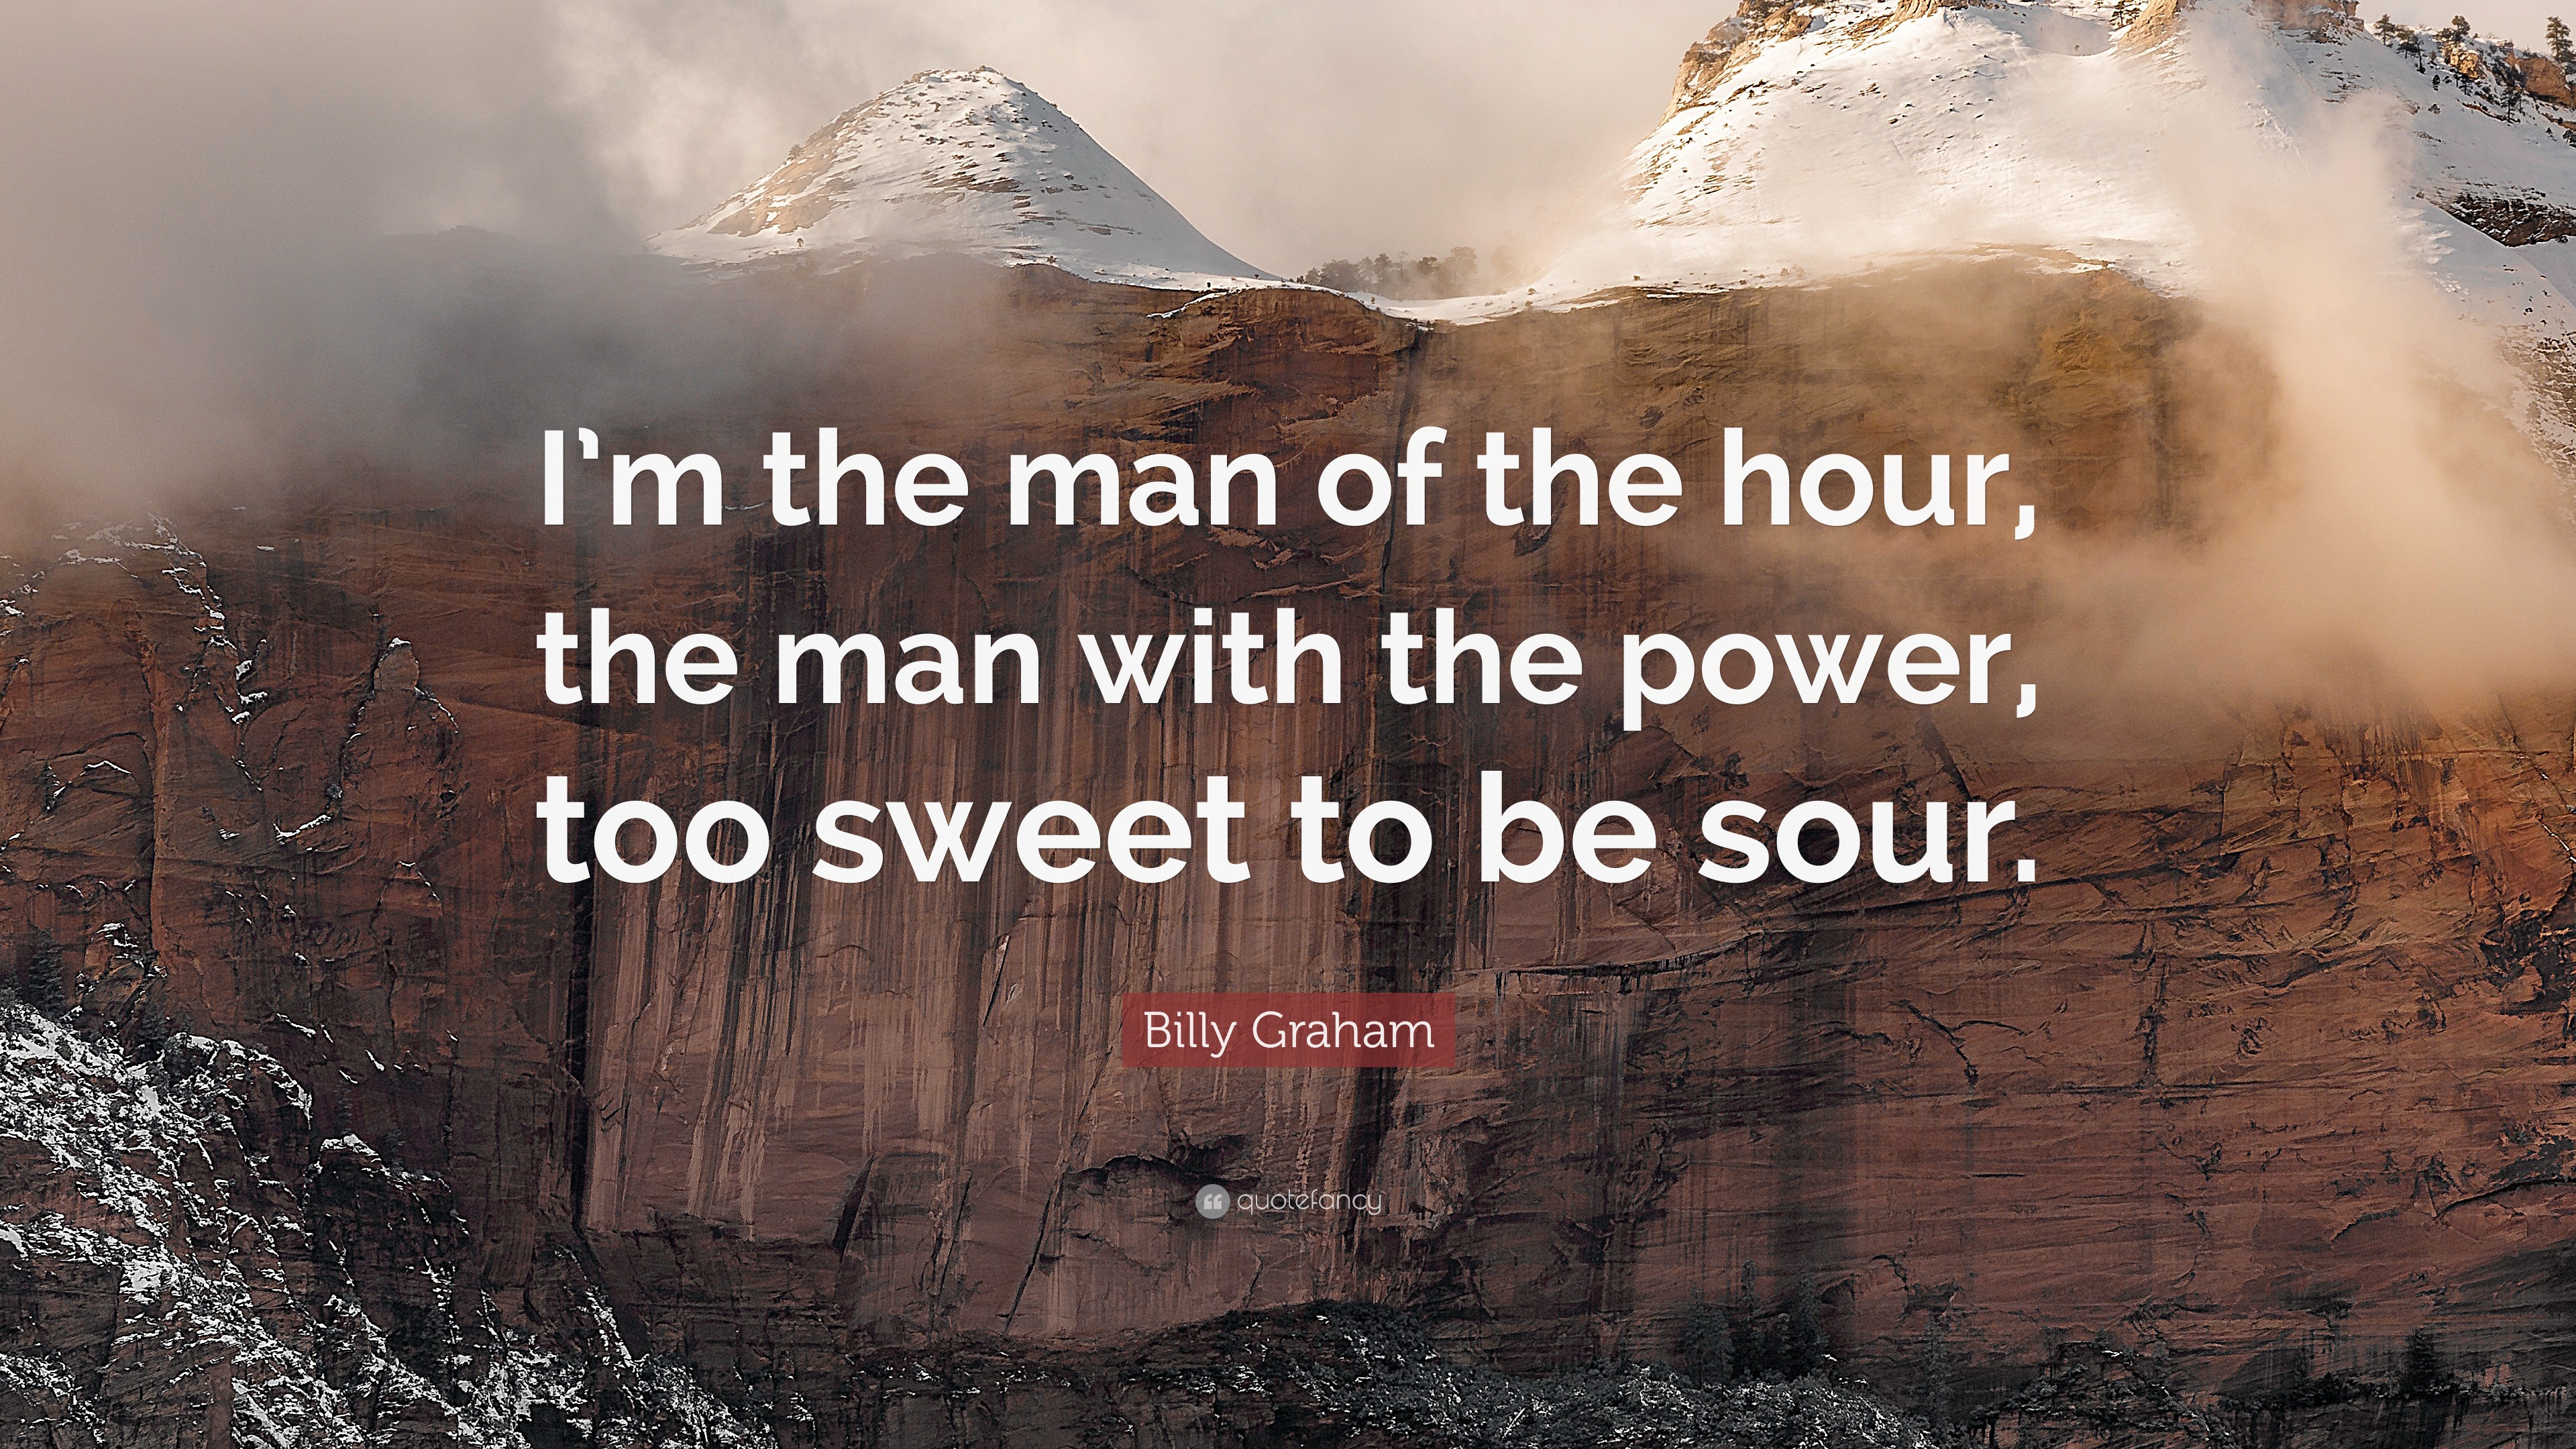 Billy Graham Quote: “I'm the man of the hour, the man with the power, too